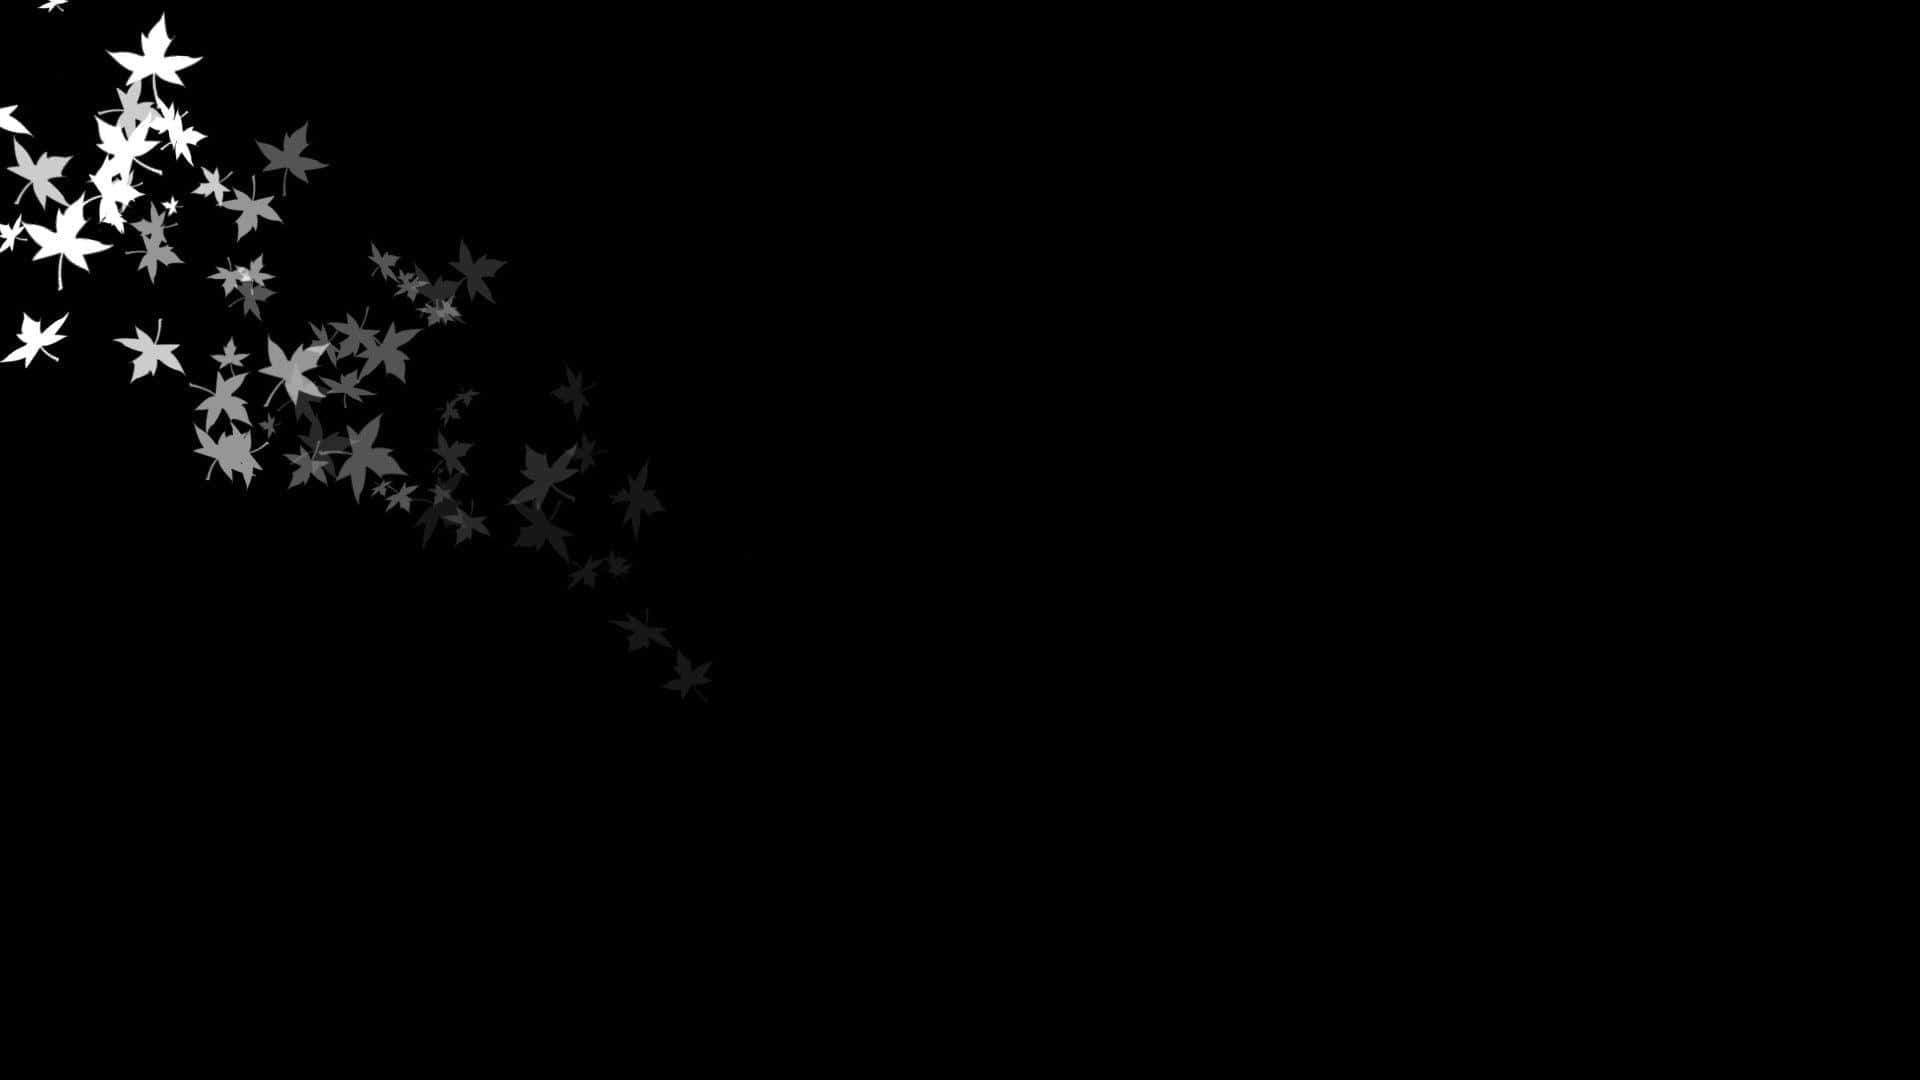 A Black Background With White Stars Flying In The Air